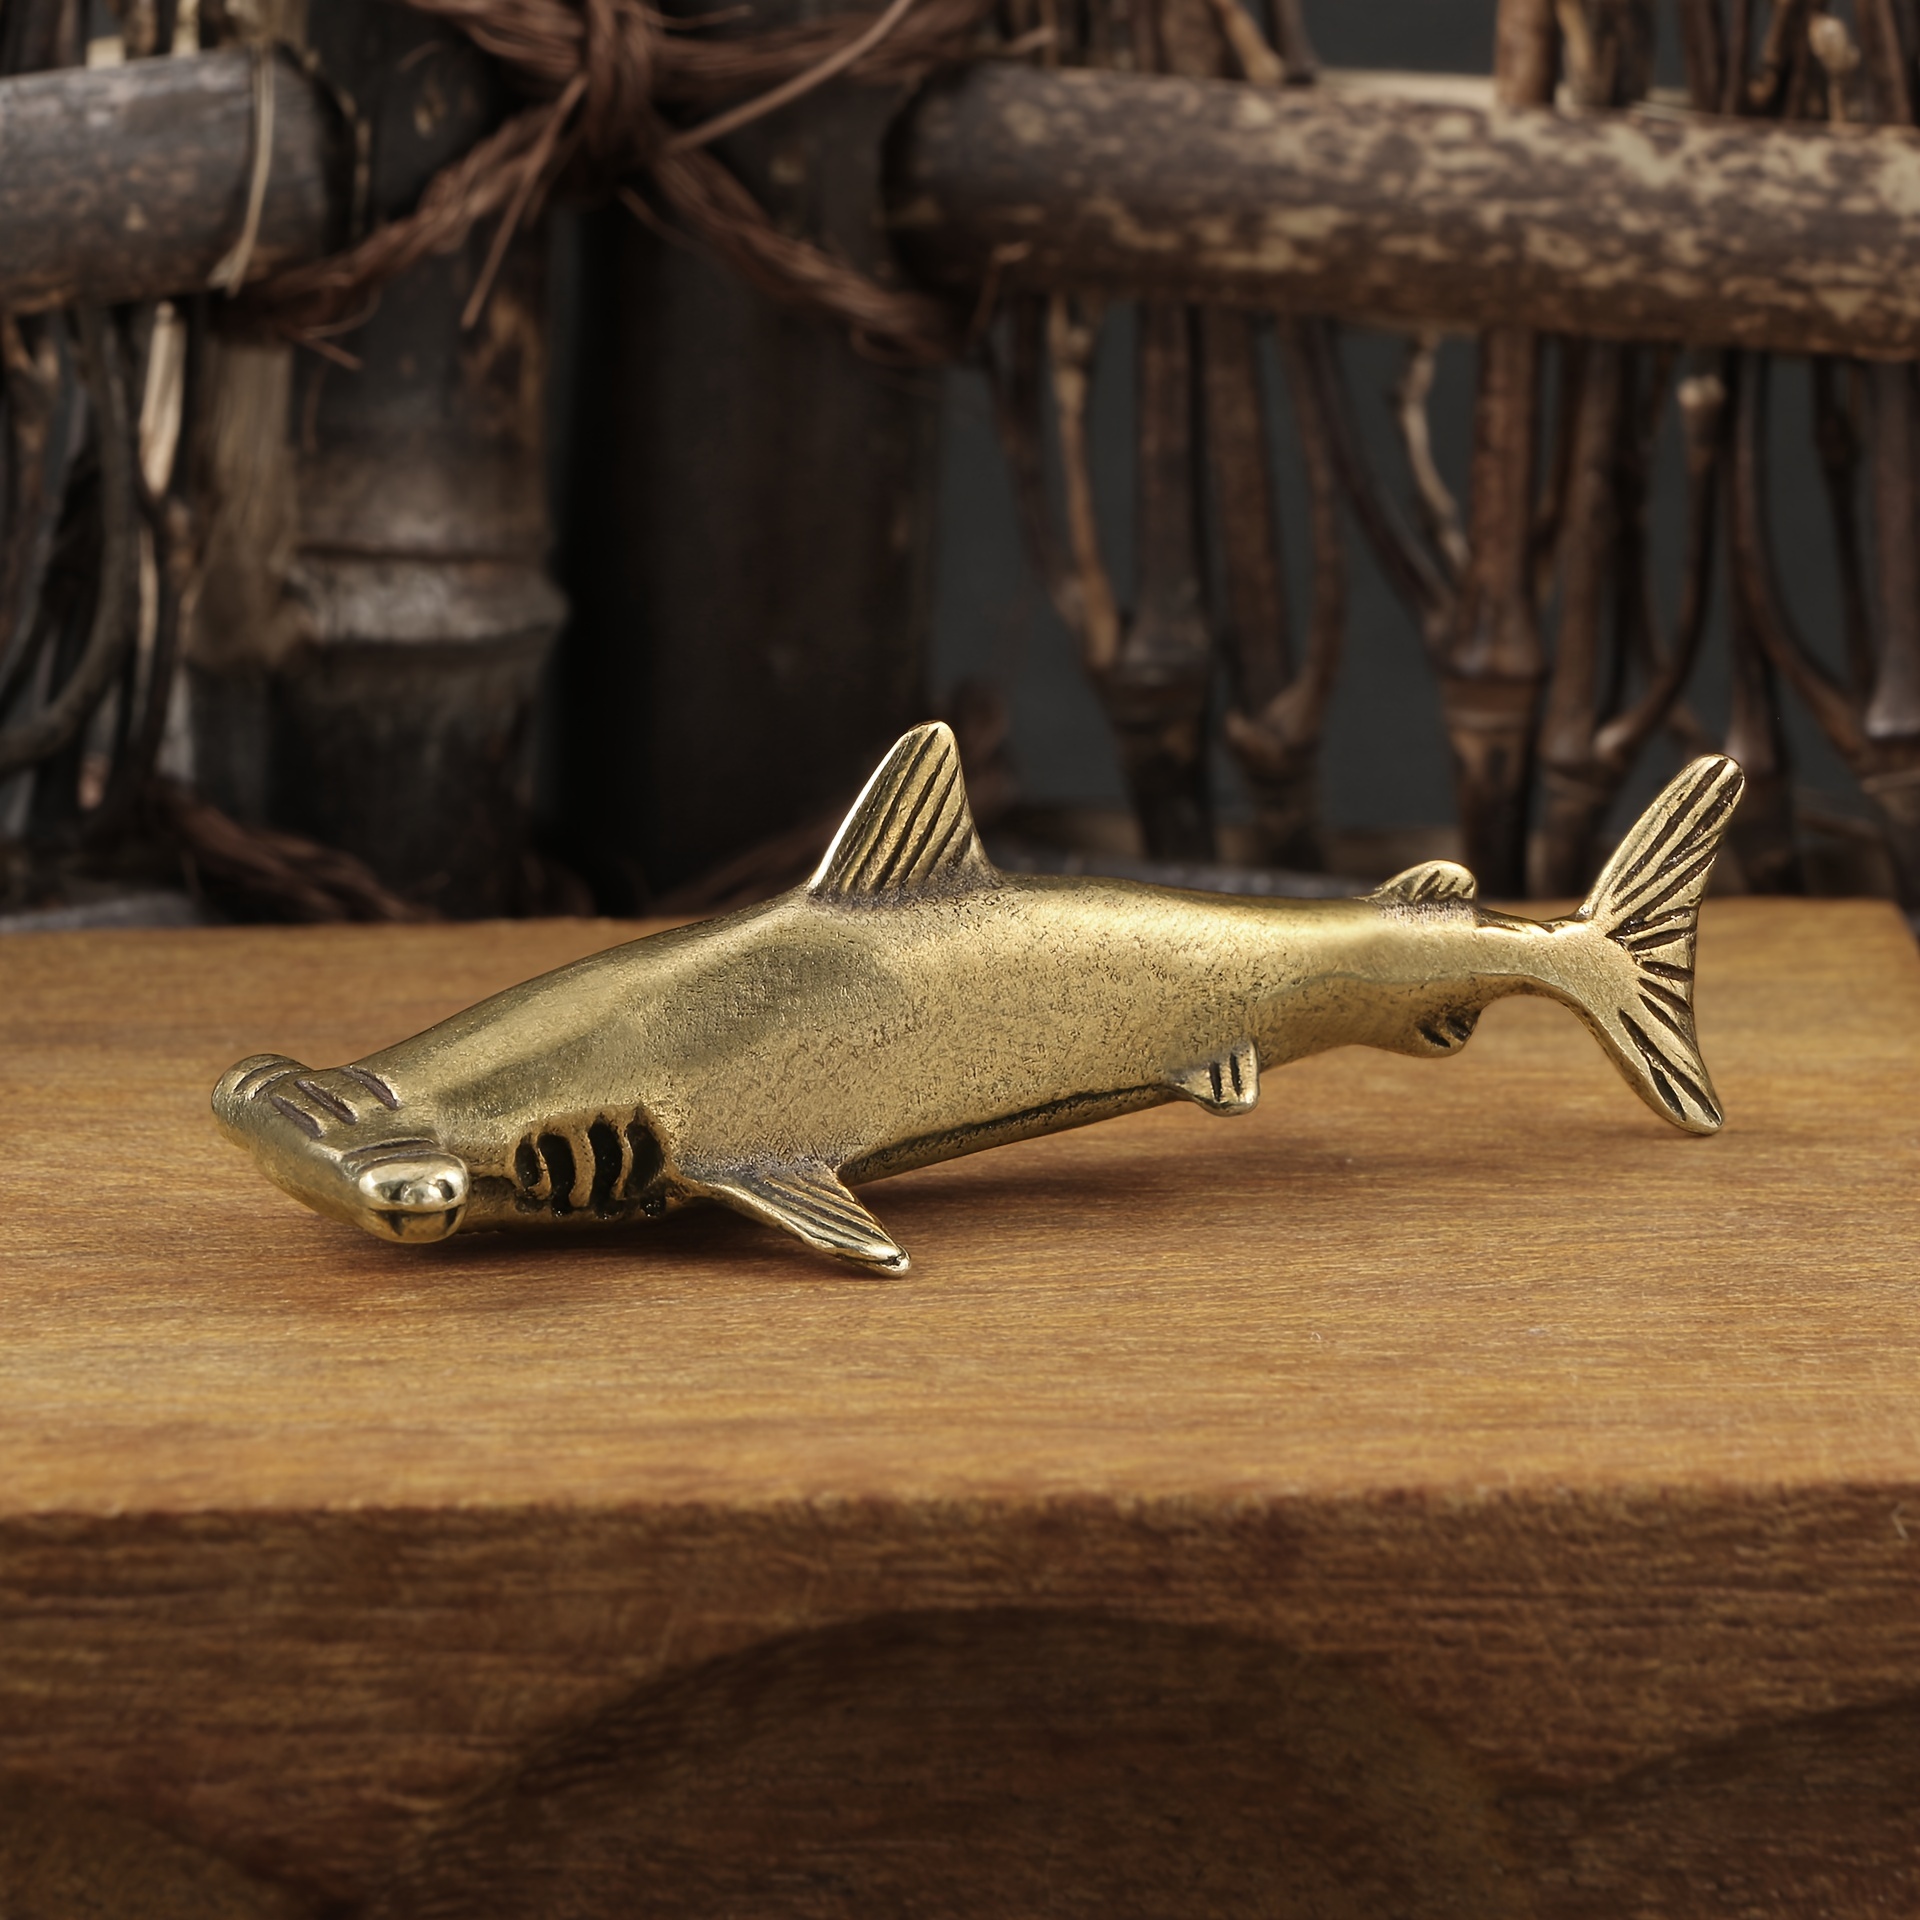 

Vintage Brass Shark Figurine - Handcrafted Copper Tea Pet & Tabletop Decor, Perfect For Home & Office